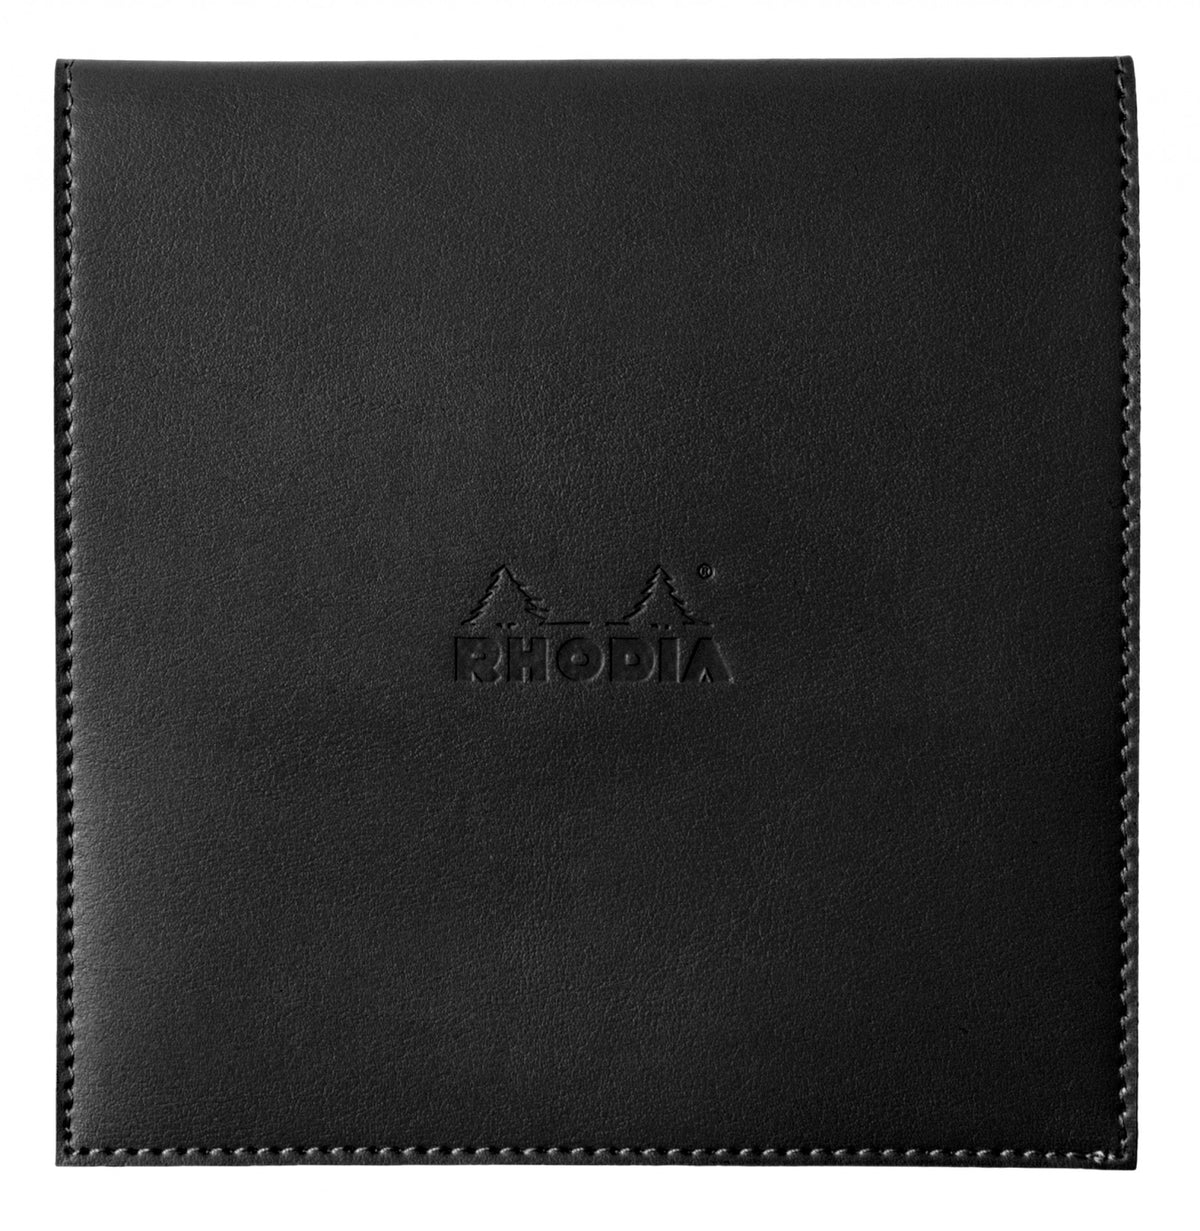 Pad Holders with Pen Loop - Lightly grained leatherette covers with embossed logo, comes complete with one #148 Rhodia graph pad, Inner pocket for notes & receipts.  Measures 5 3/4" x 5 3/4" 80 Sheets (160 Pages) Graph Pages White Acid-Free Paper Paper Weight: 80 GSM Black Leatherette Cover